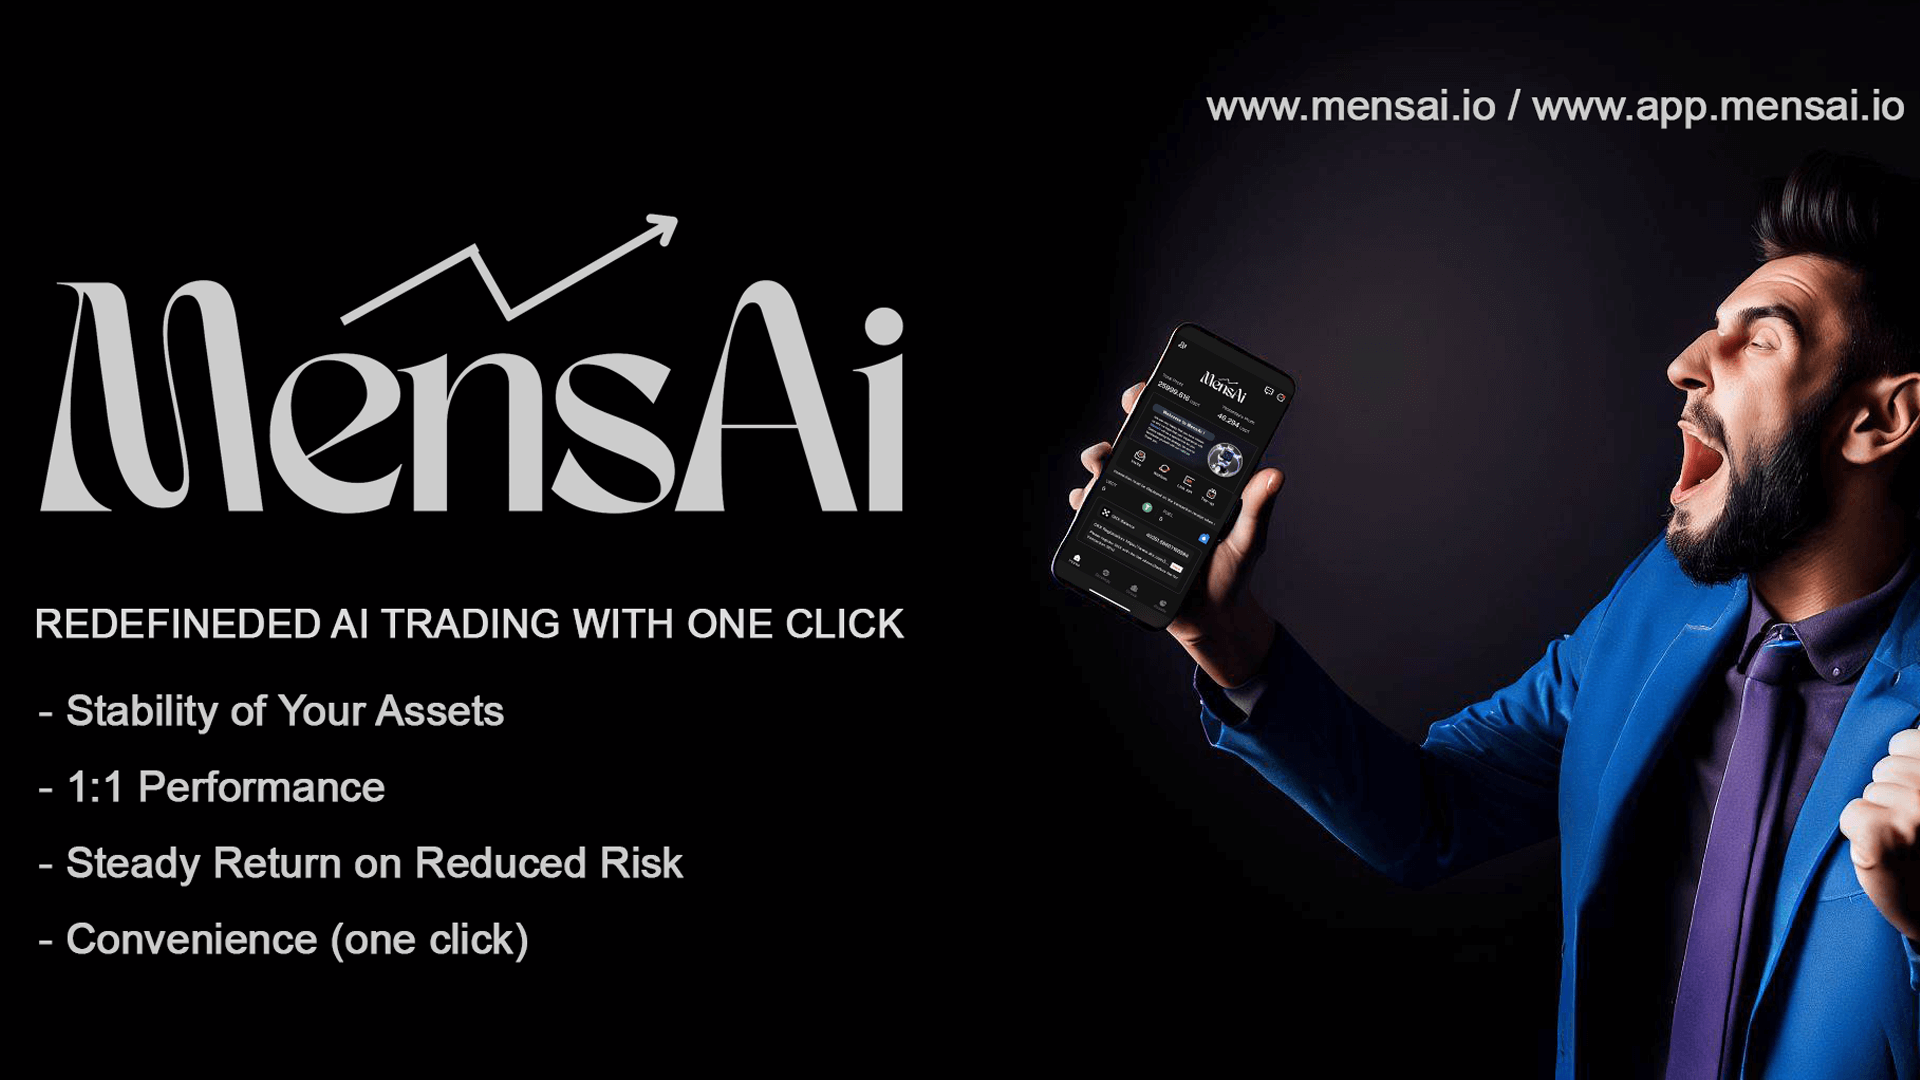 MensAi AI Trading Bot Released: “Artificial Intelligence to Completely Replace Traders”